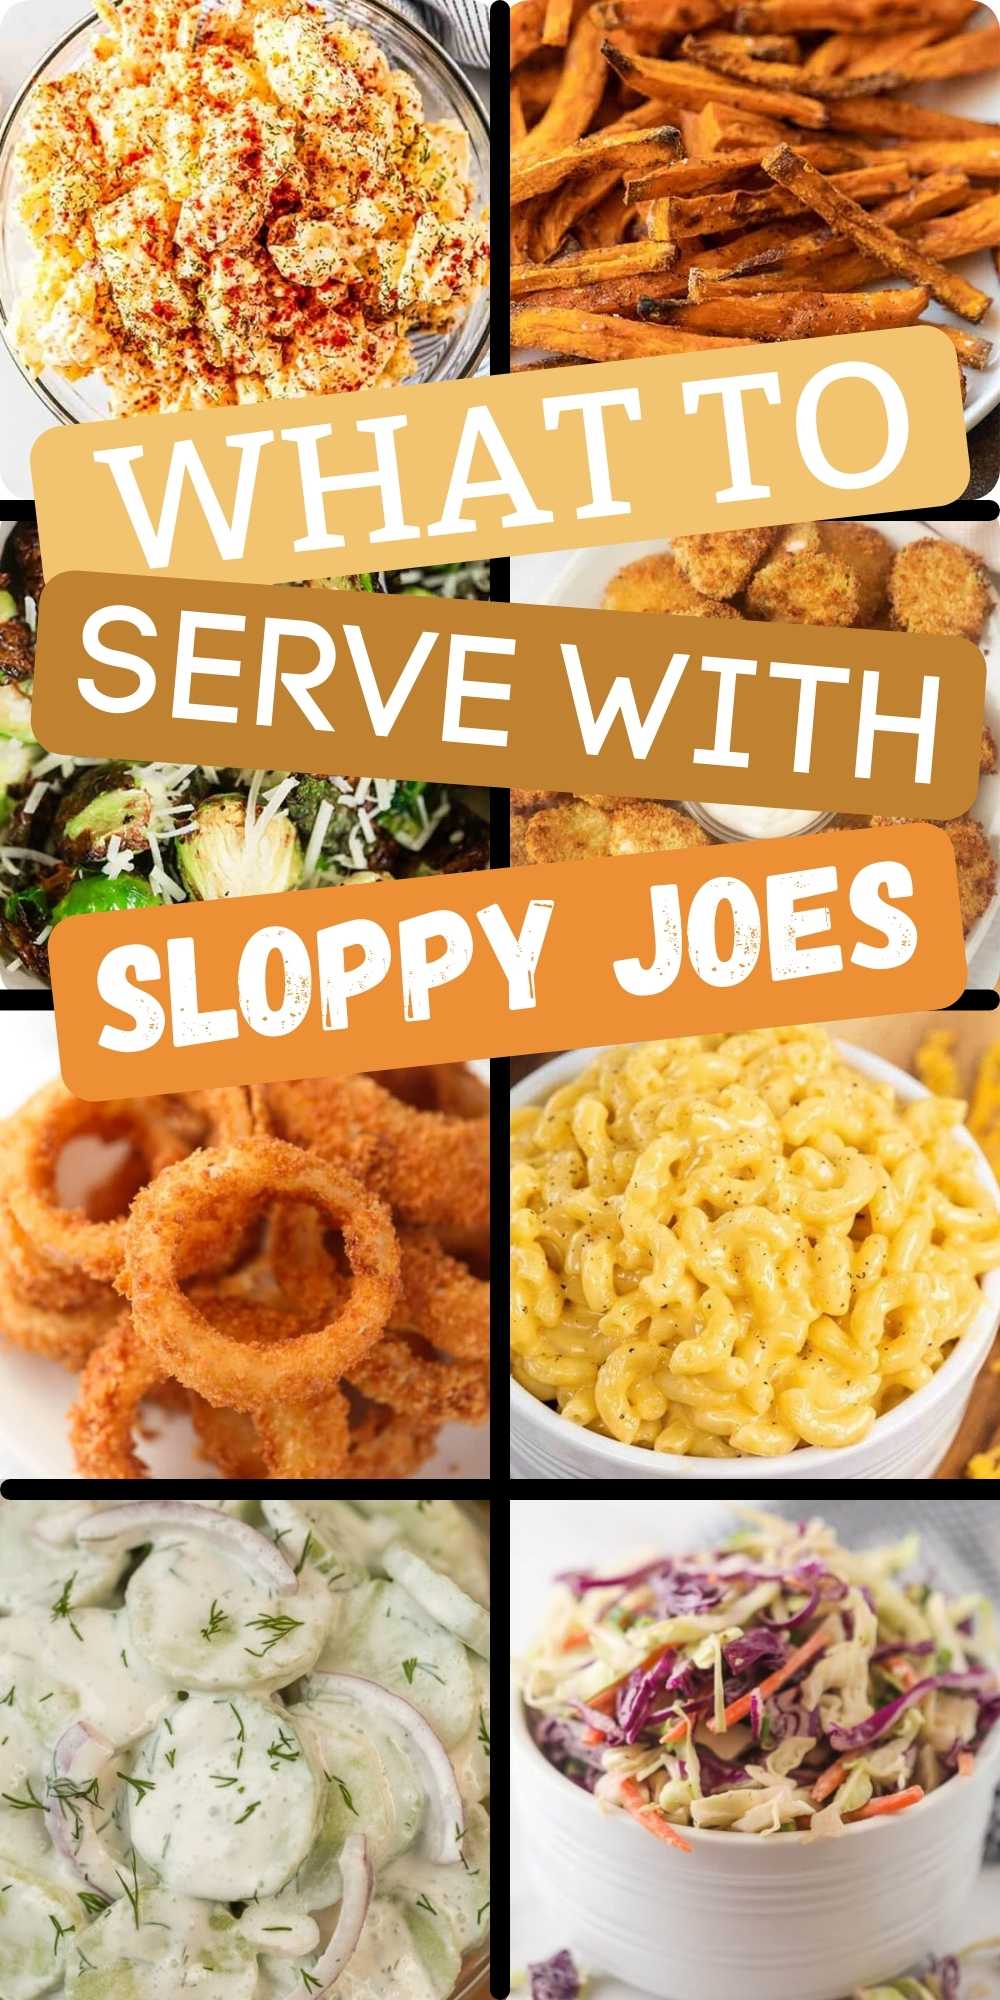 Check out what to serve with sloppy joes.  These are our favorite easy side dishes to serve with our favorite sloppy joes recipes (crock pot and stove top)!  Check out our favorite side dish recipes!  #eatingonadime #sidedishrecipes #sloppyjoes #sidedishes 
